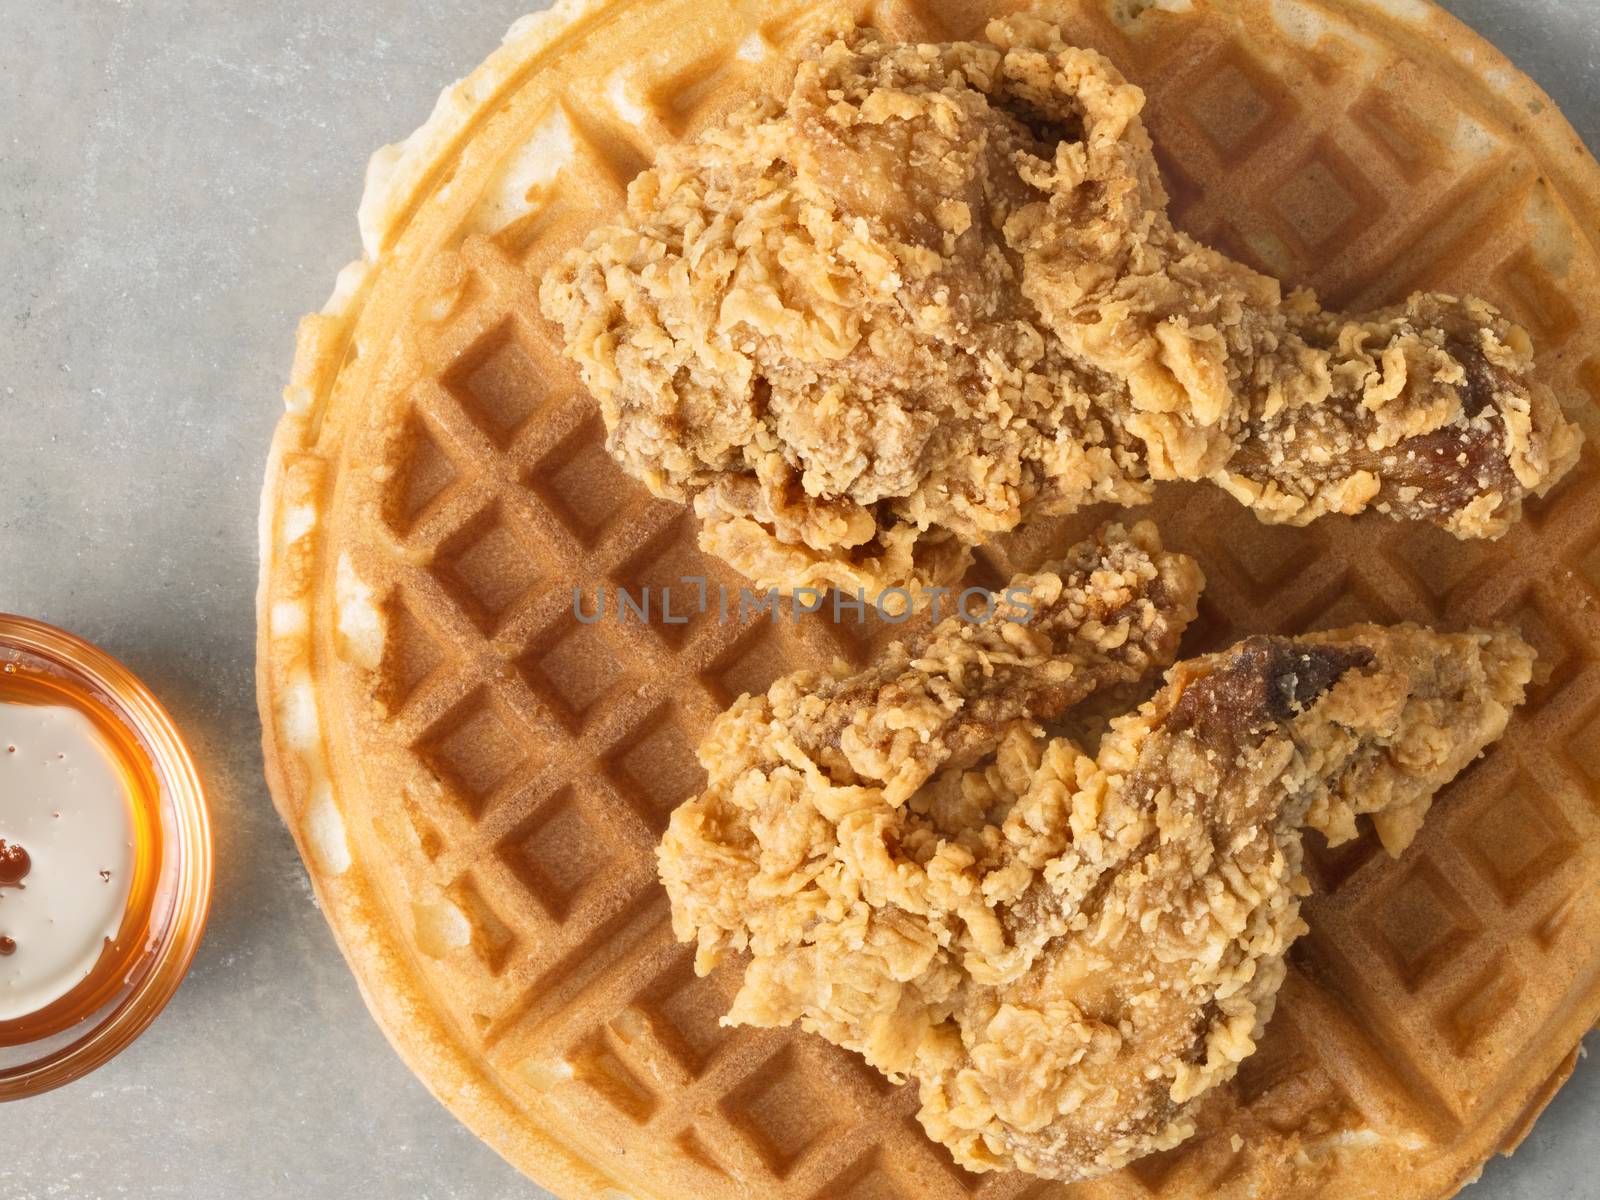 rustic southern american comfort food chicken waffle by zkruger